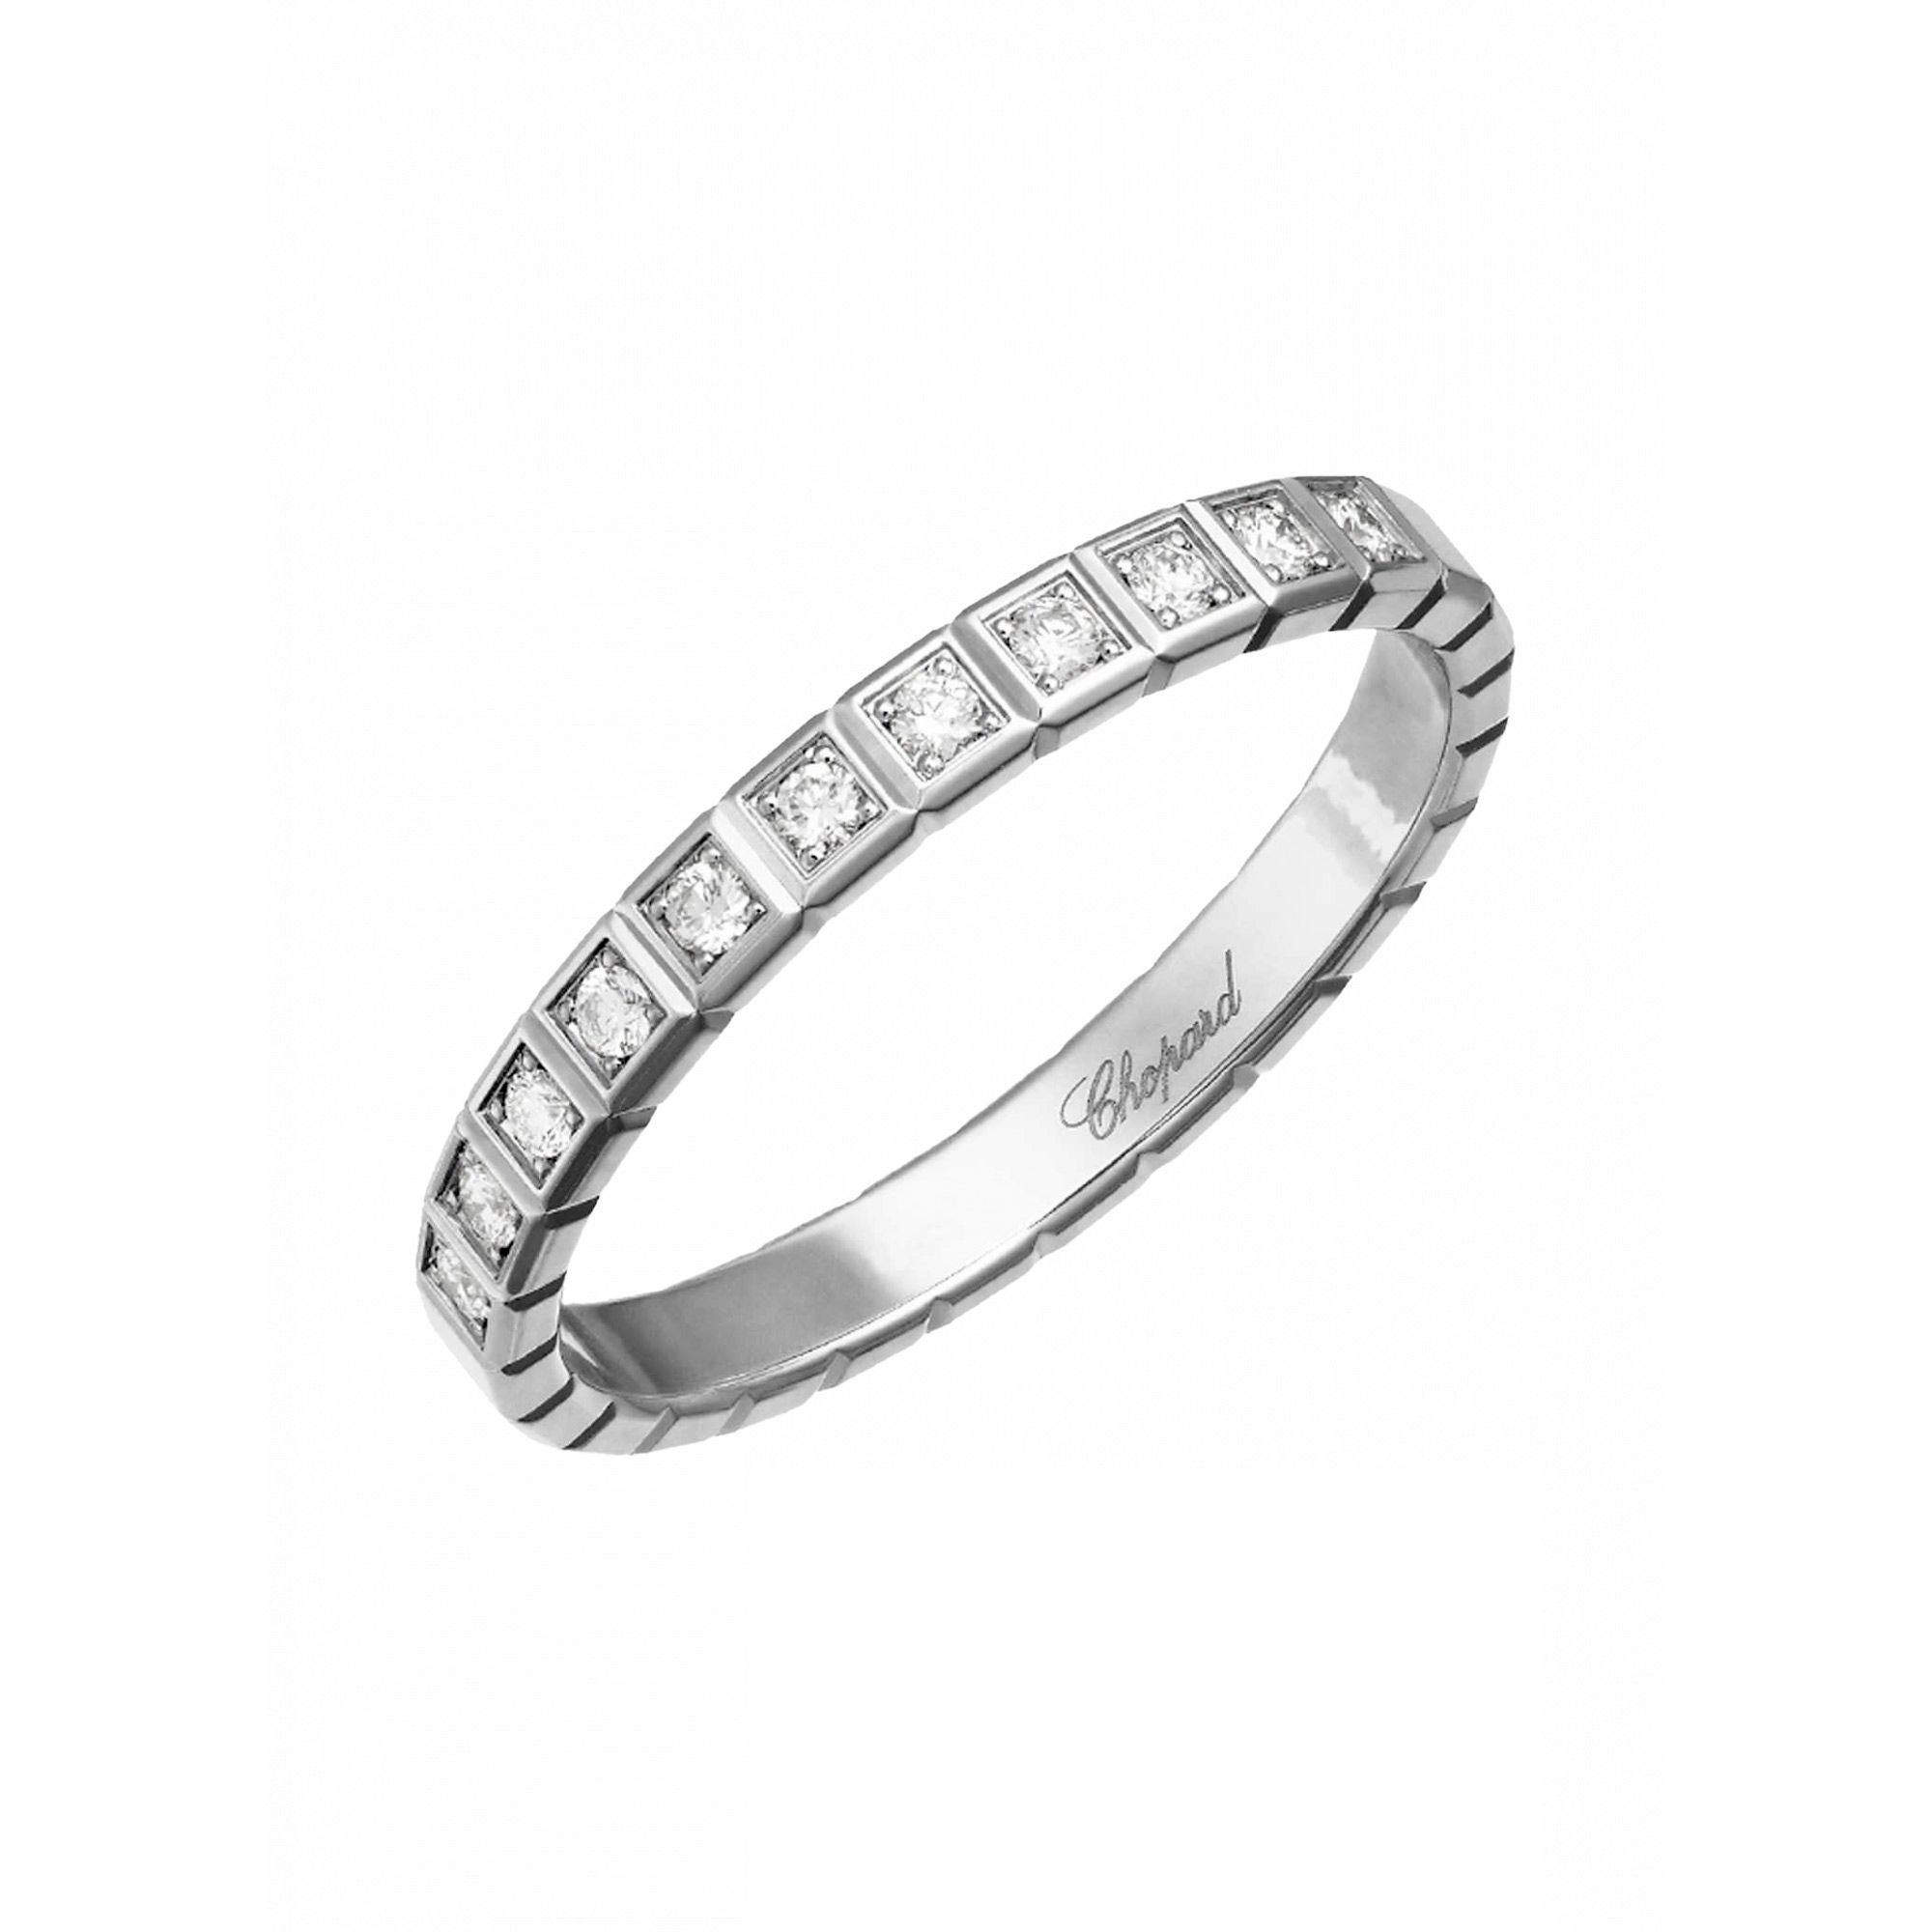 Chopard Ice Cube White Gold Diamond Ring 827702 1255 Regarding Most Popular Sparkling Ice Cube Rings (View 2 of 25)